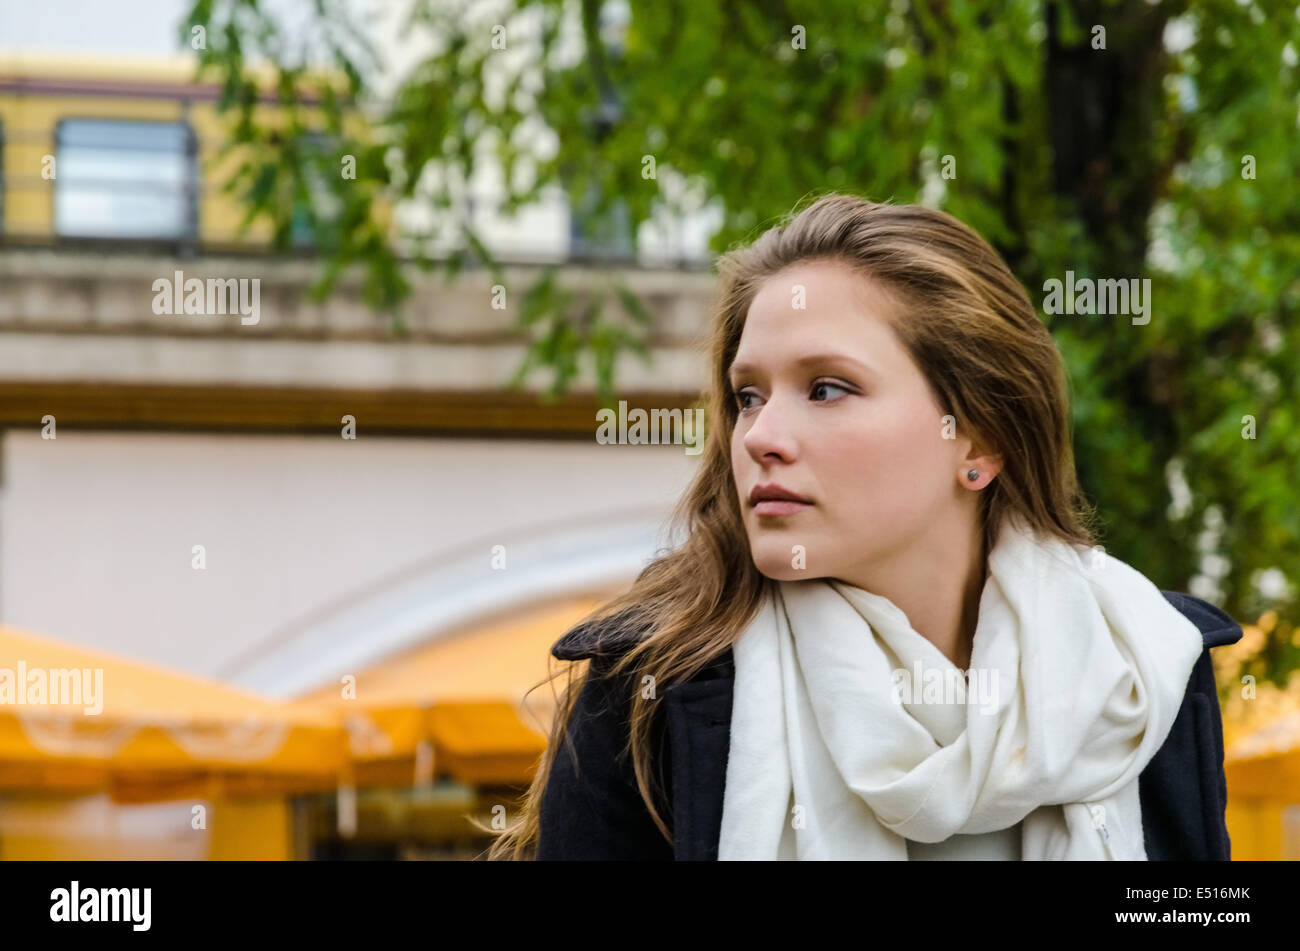 Woman Wearing Scarf While Looking Away Stock Photo